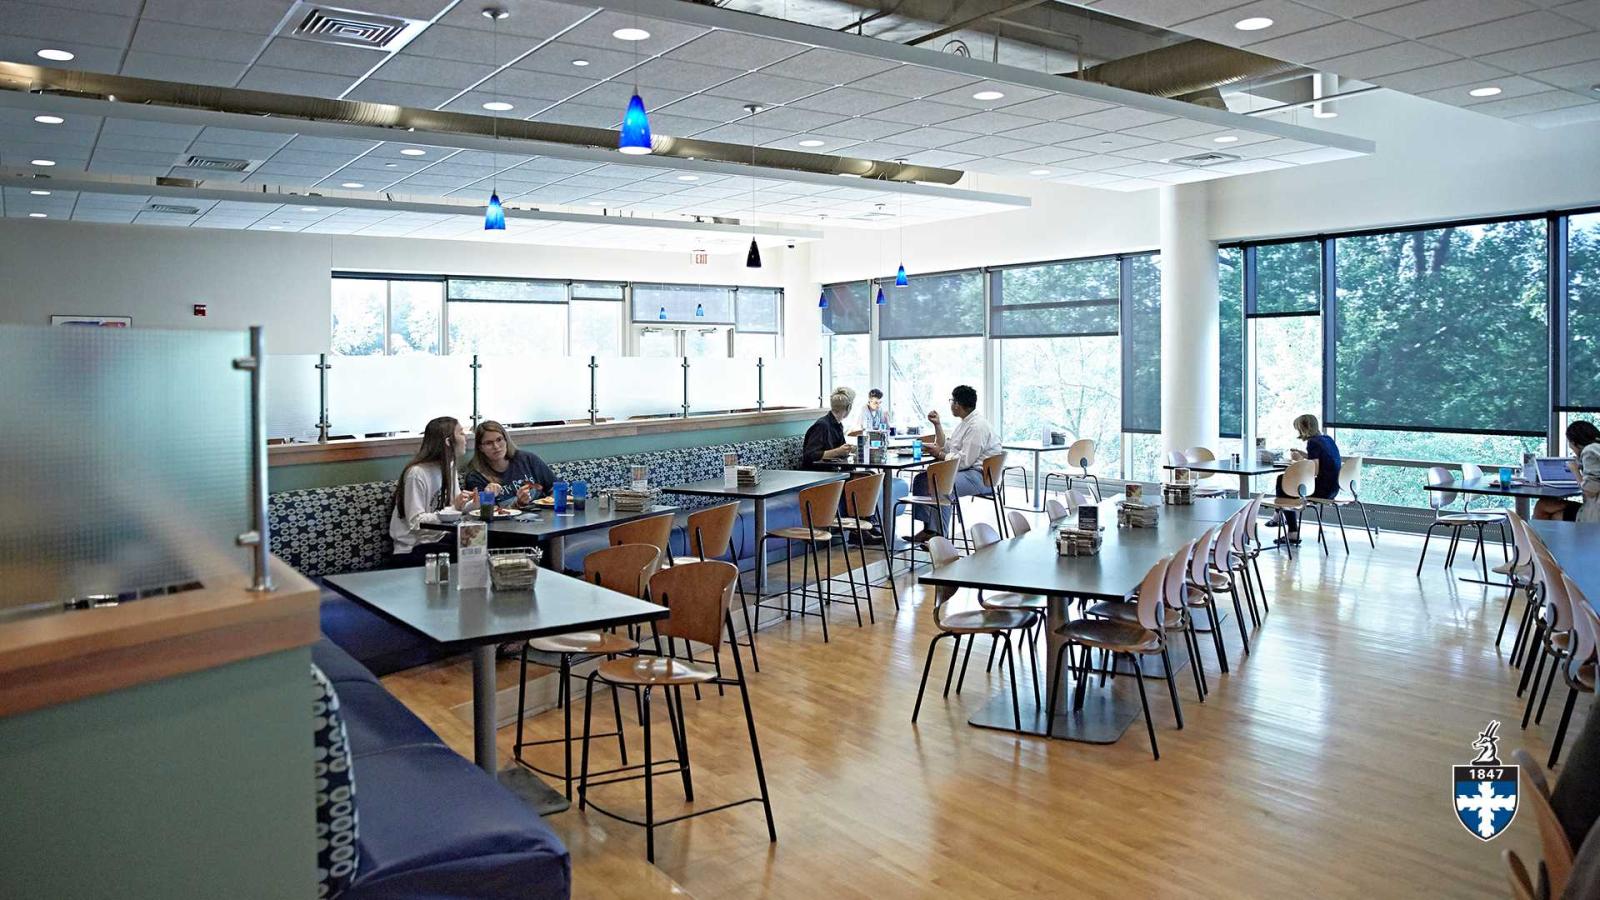 Students in open cafeteria eating with floor-length windows in background.